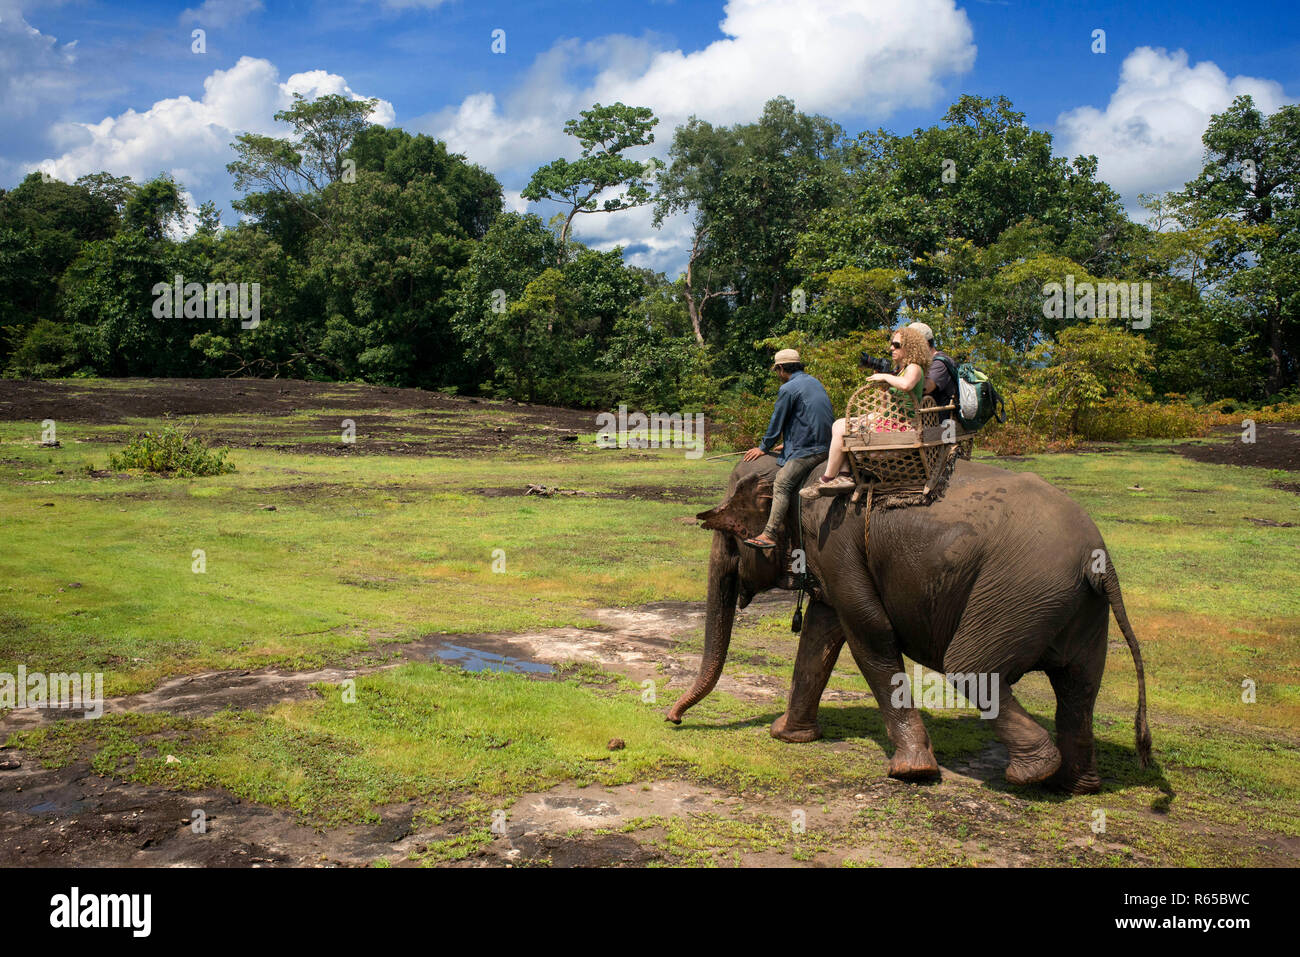 A tourist and mahout ride an Elephant ride in Kiet Ngong, Laos Stock Photo